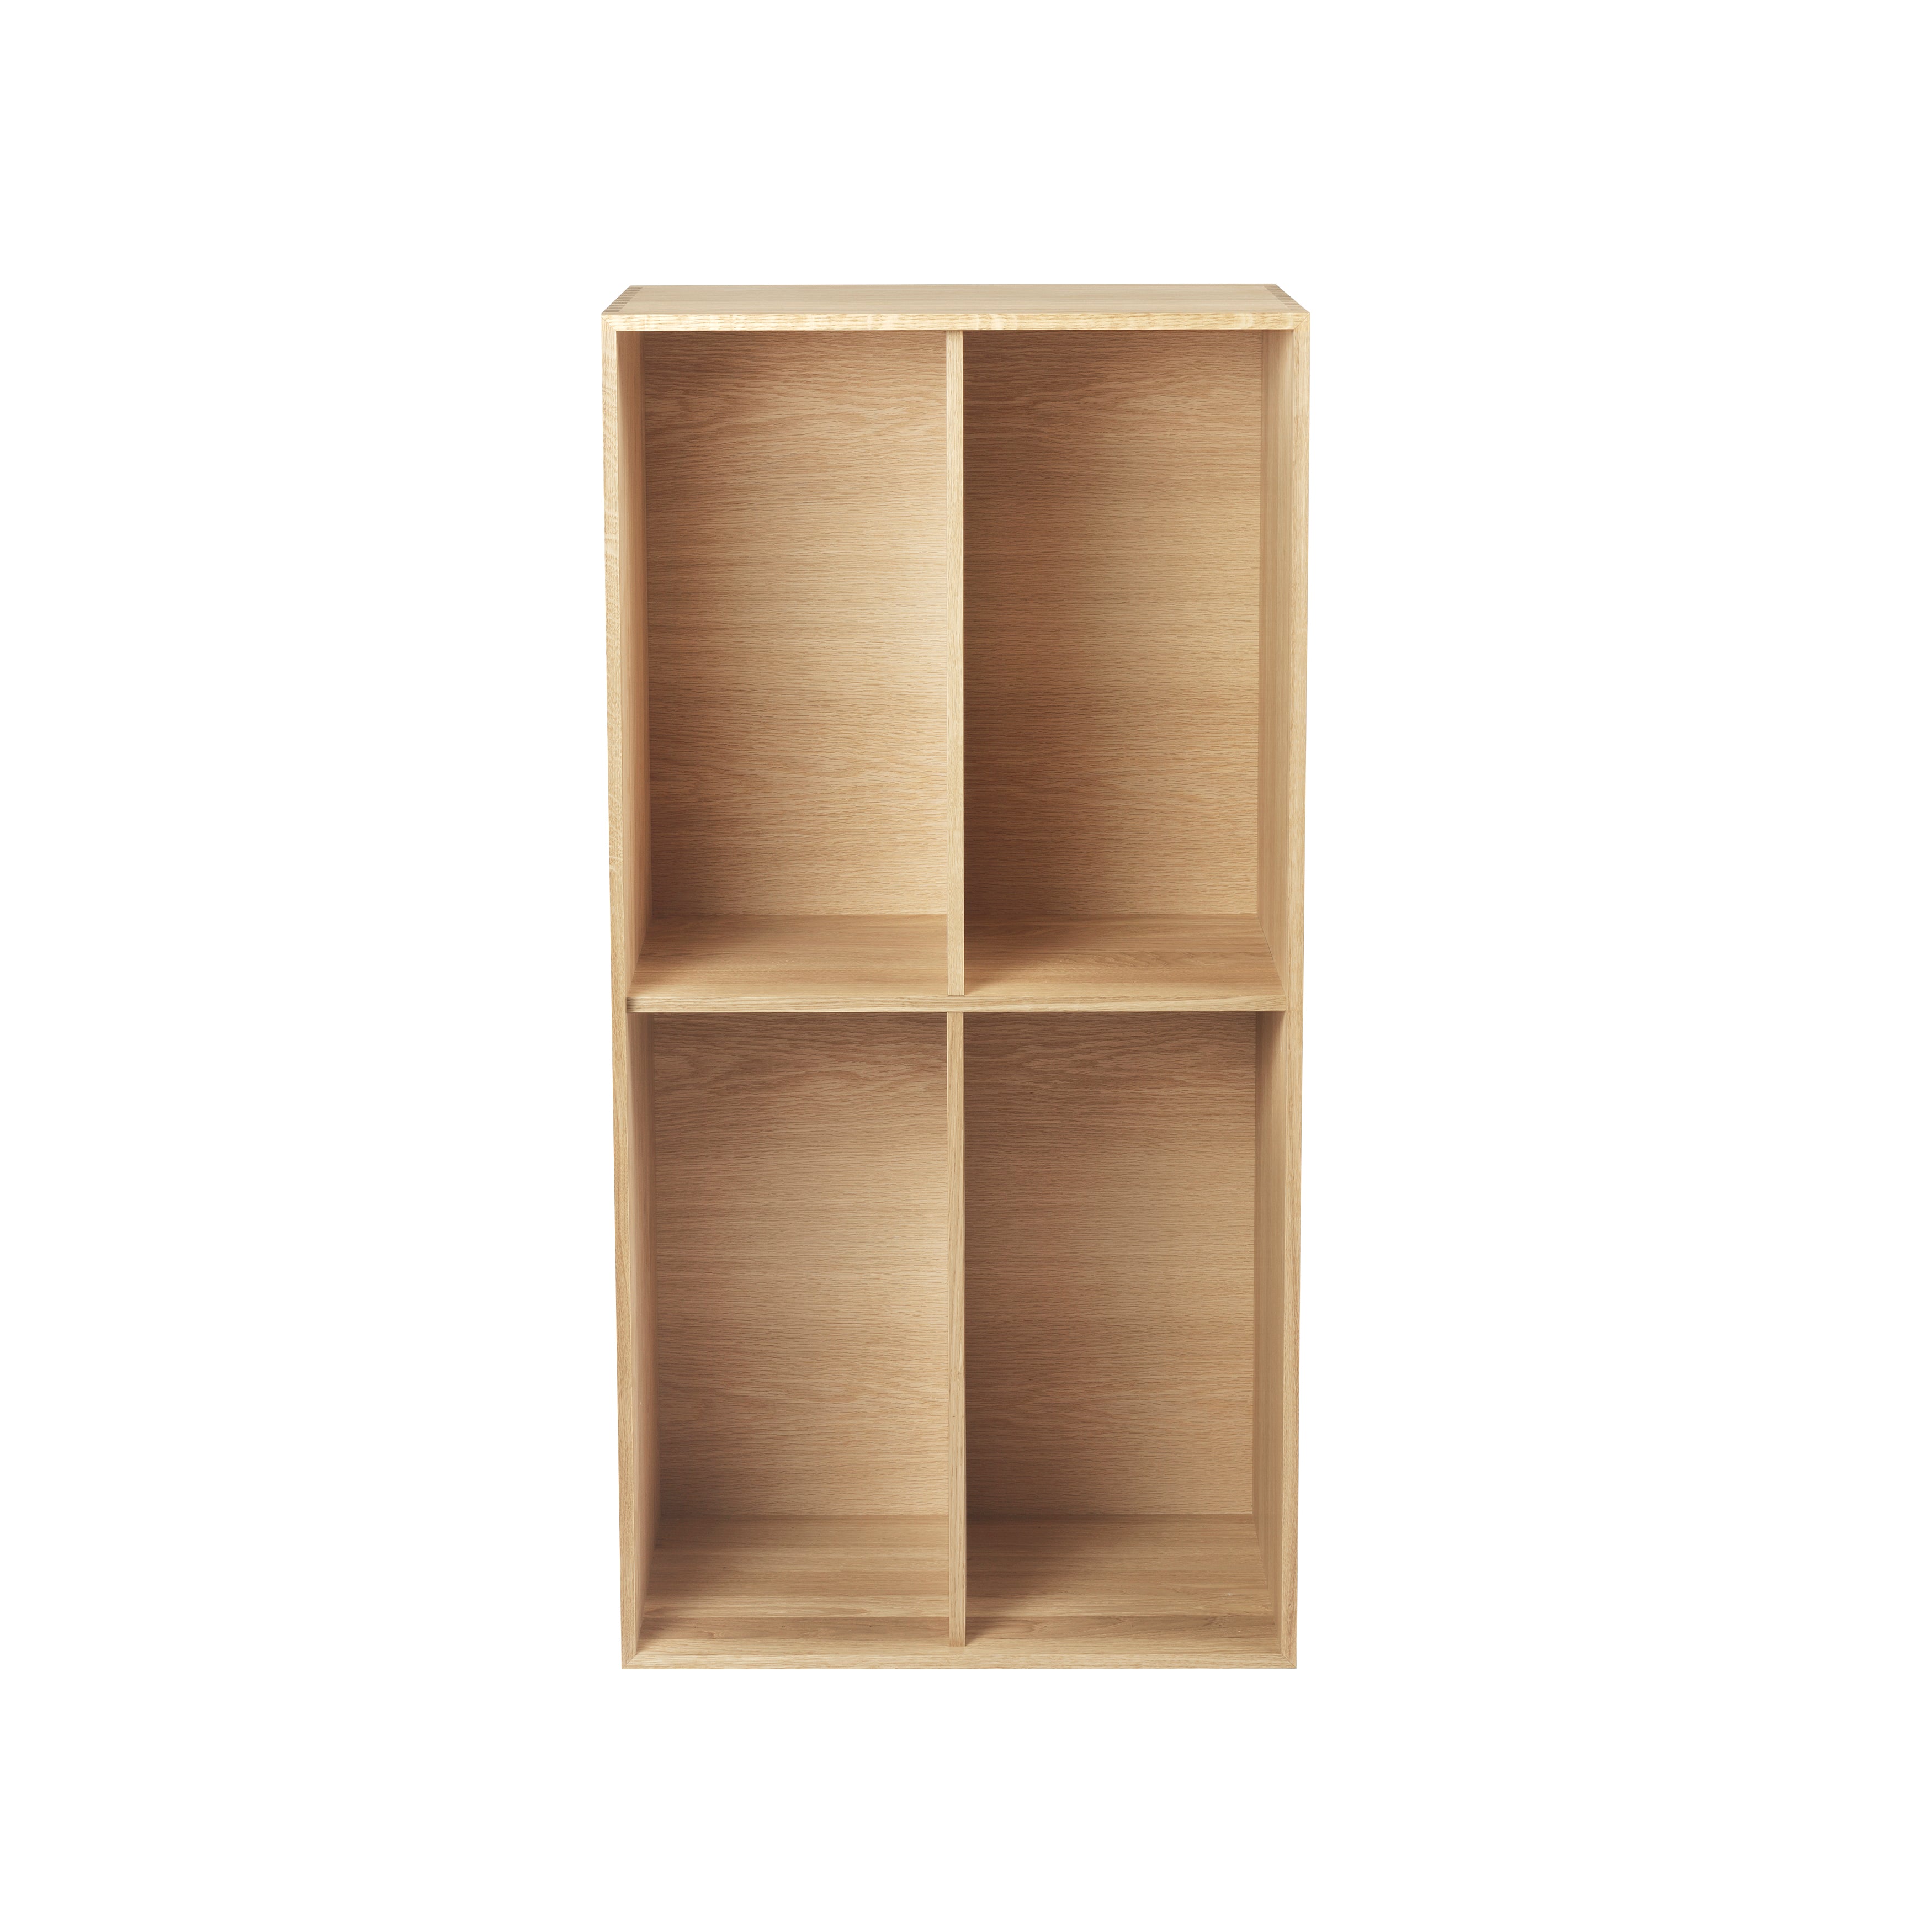 FK631020 Bookcase with 2 Shelves: Oiled Oak